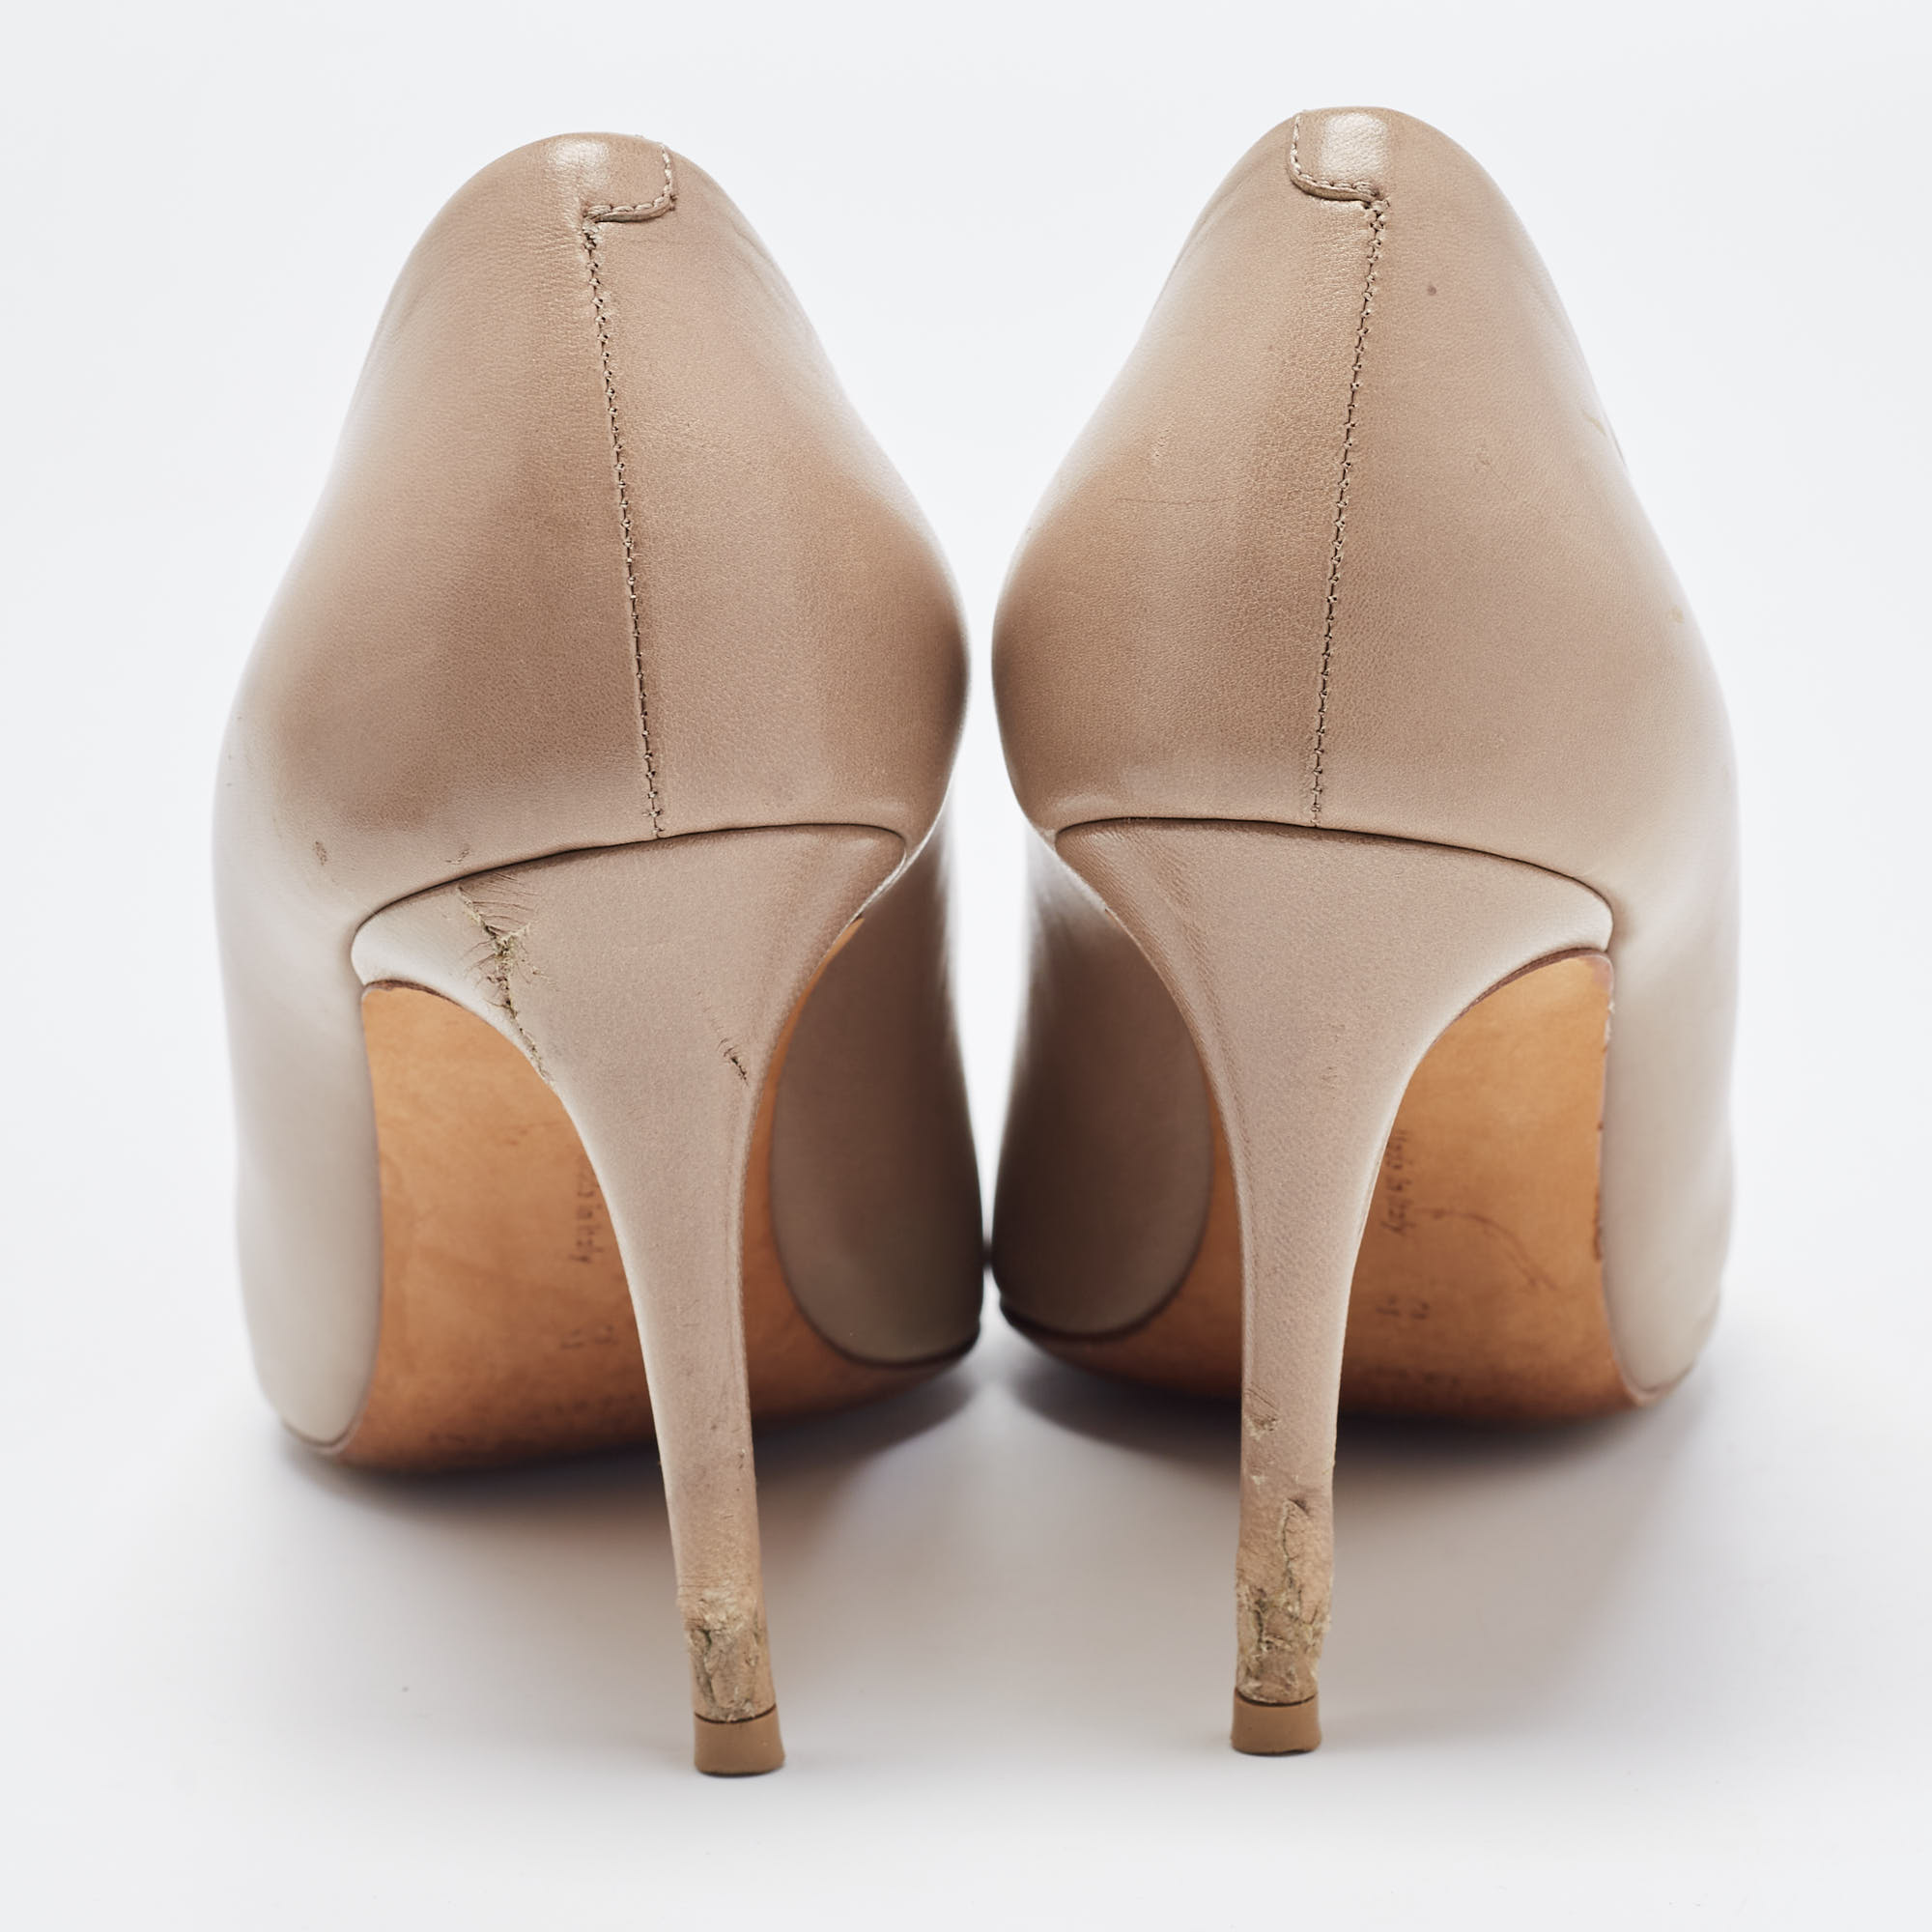 Celine Light Brown Leather Pointed Toe Pumps Size 37